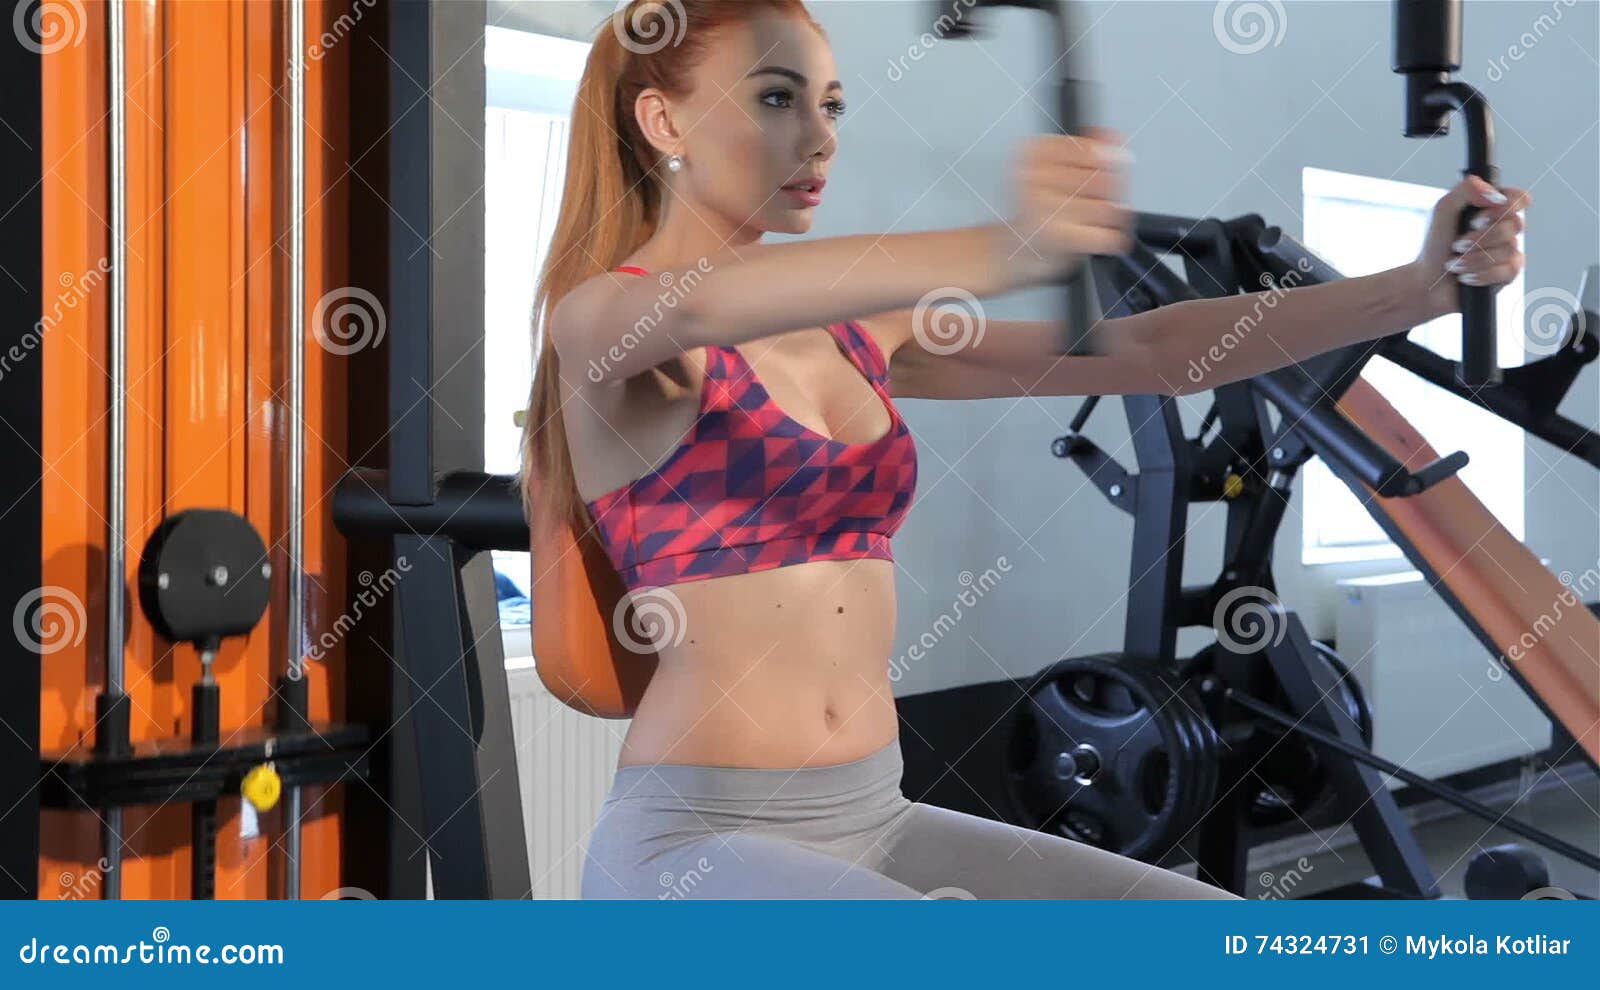 Woman Trains Her Chest Muscles on Pec Deck Machine at the Fitness